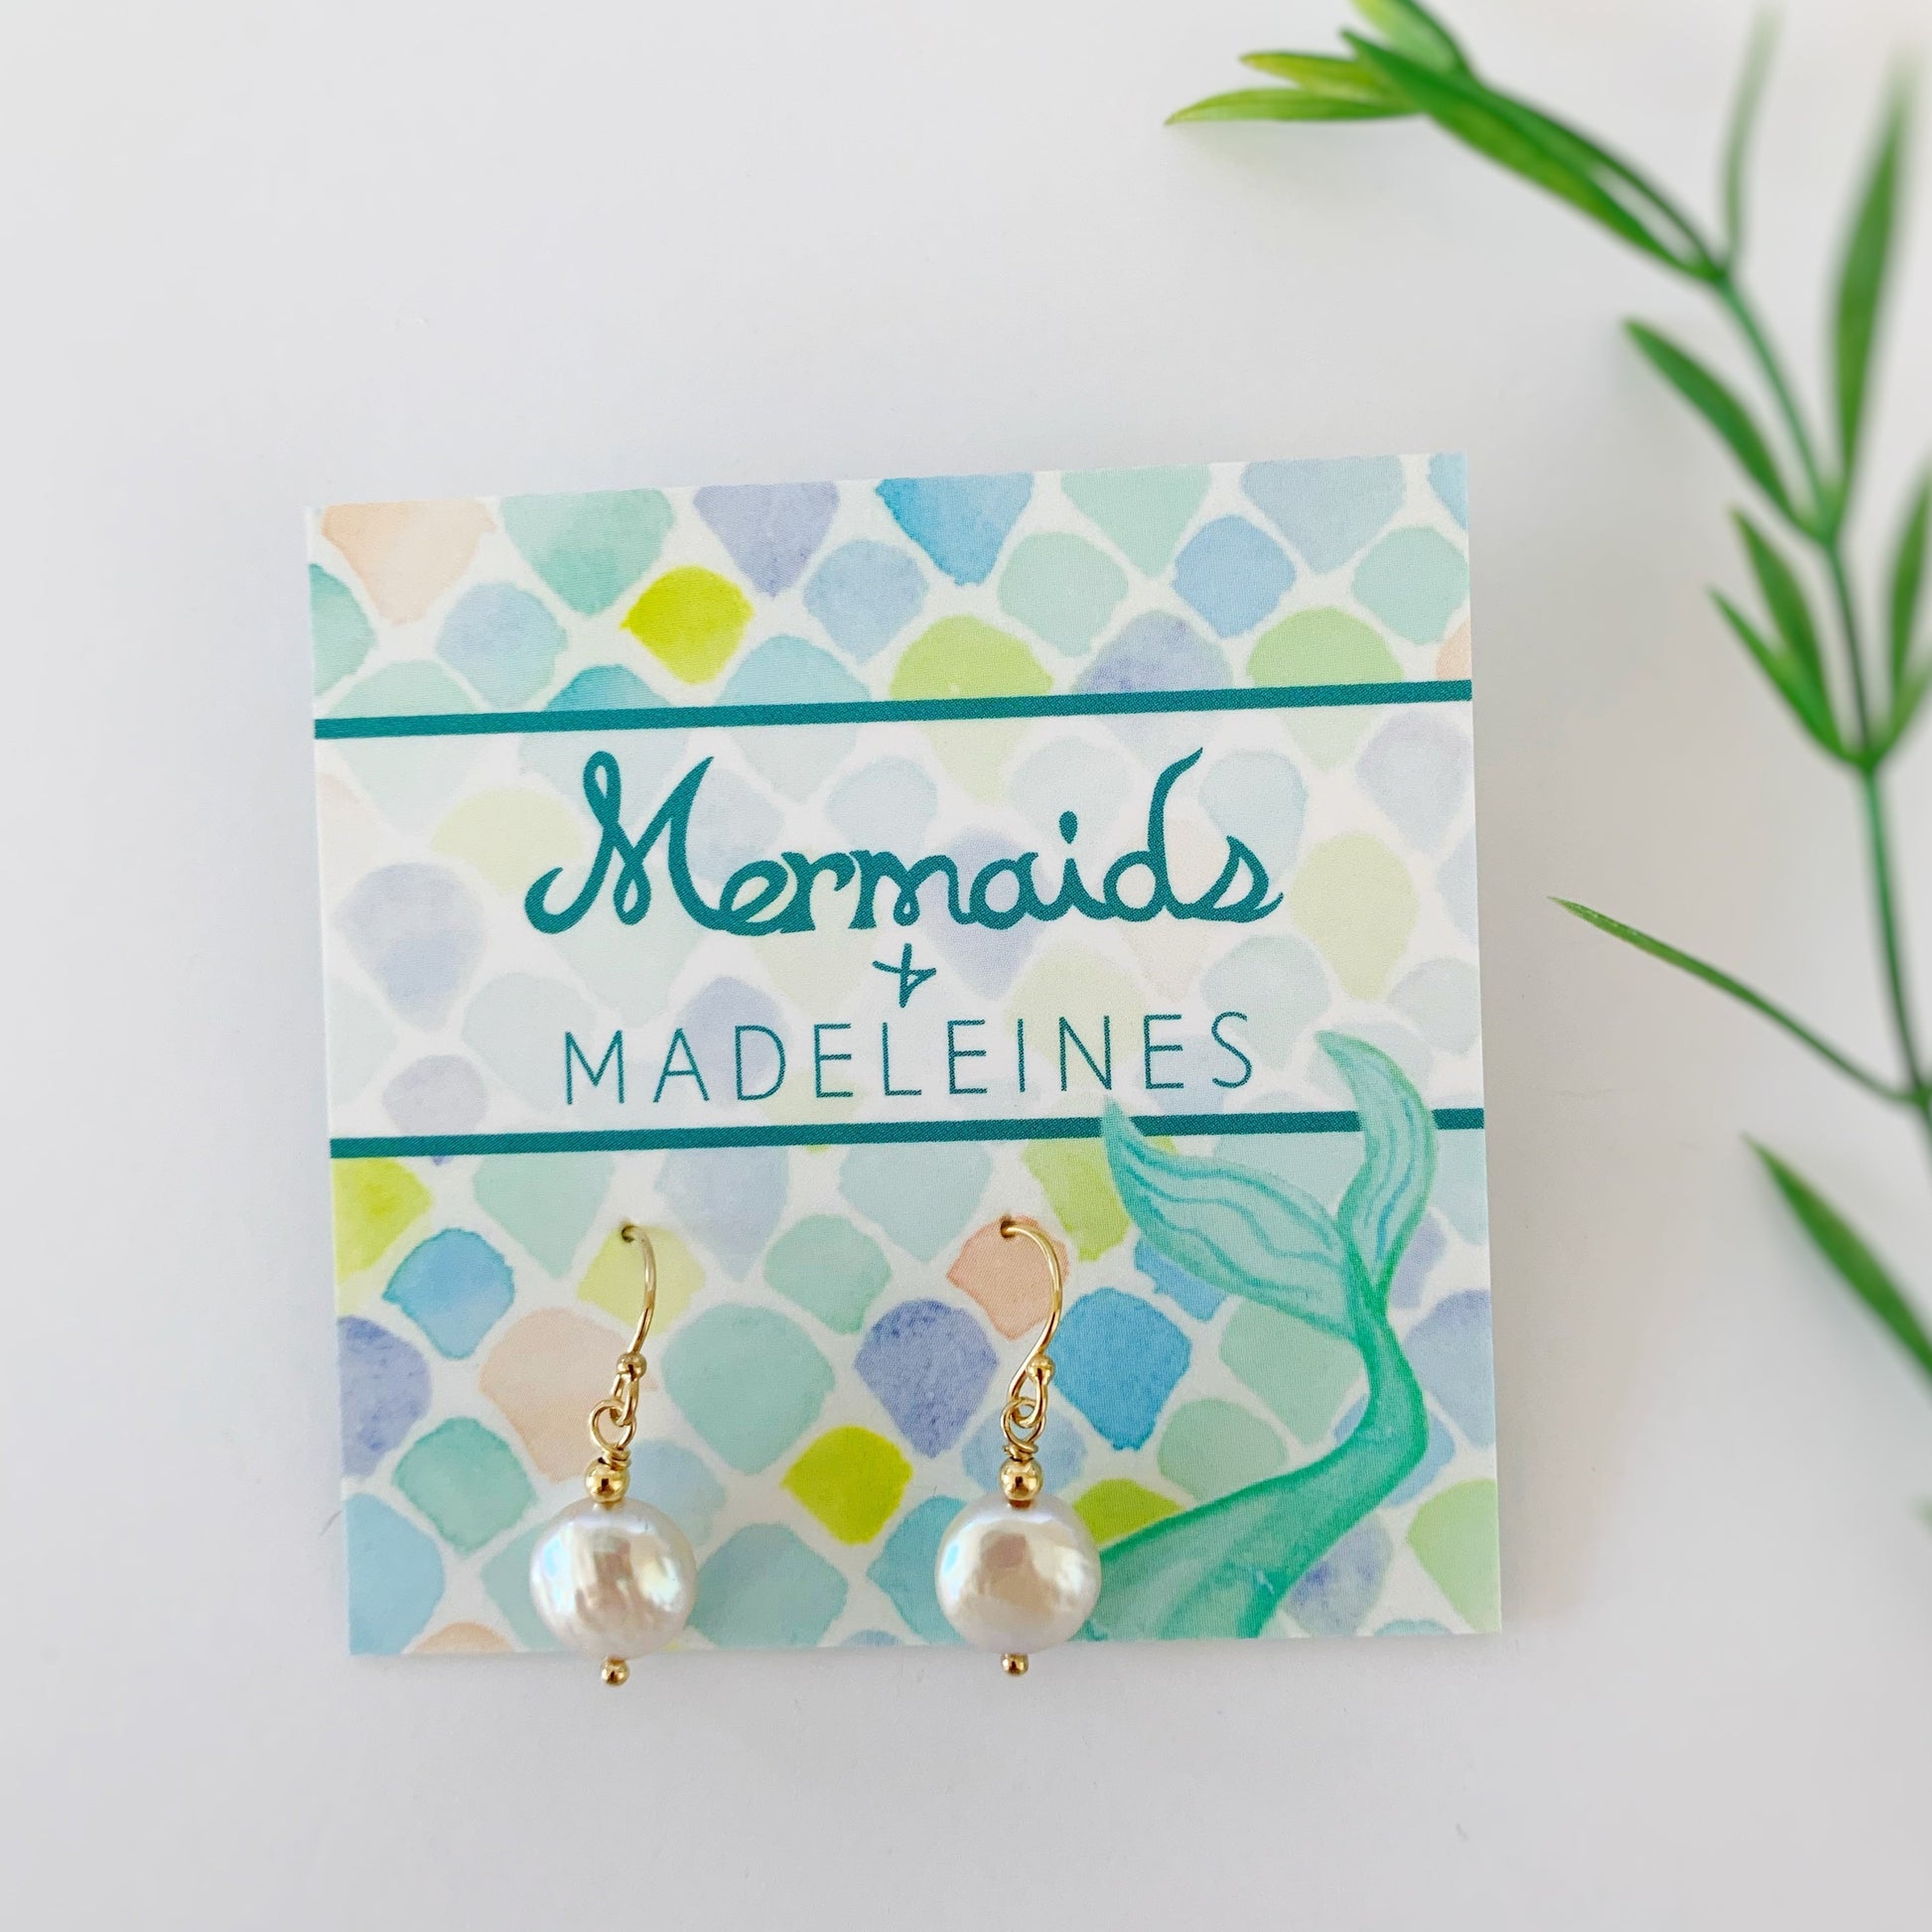 Newport Earrings in 14k gold filled. This pair of earrings is created with 14k gold filled beads and findings and iridescent freshwater coin pearls on a mermaids and madeleines earring card photographed on a white background with blurred greenery on the right side for interest